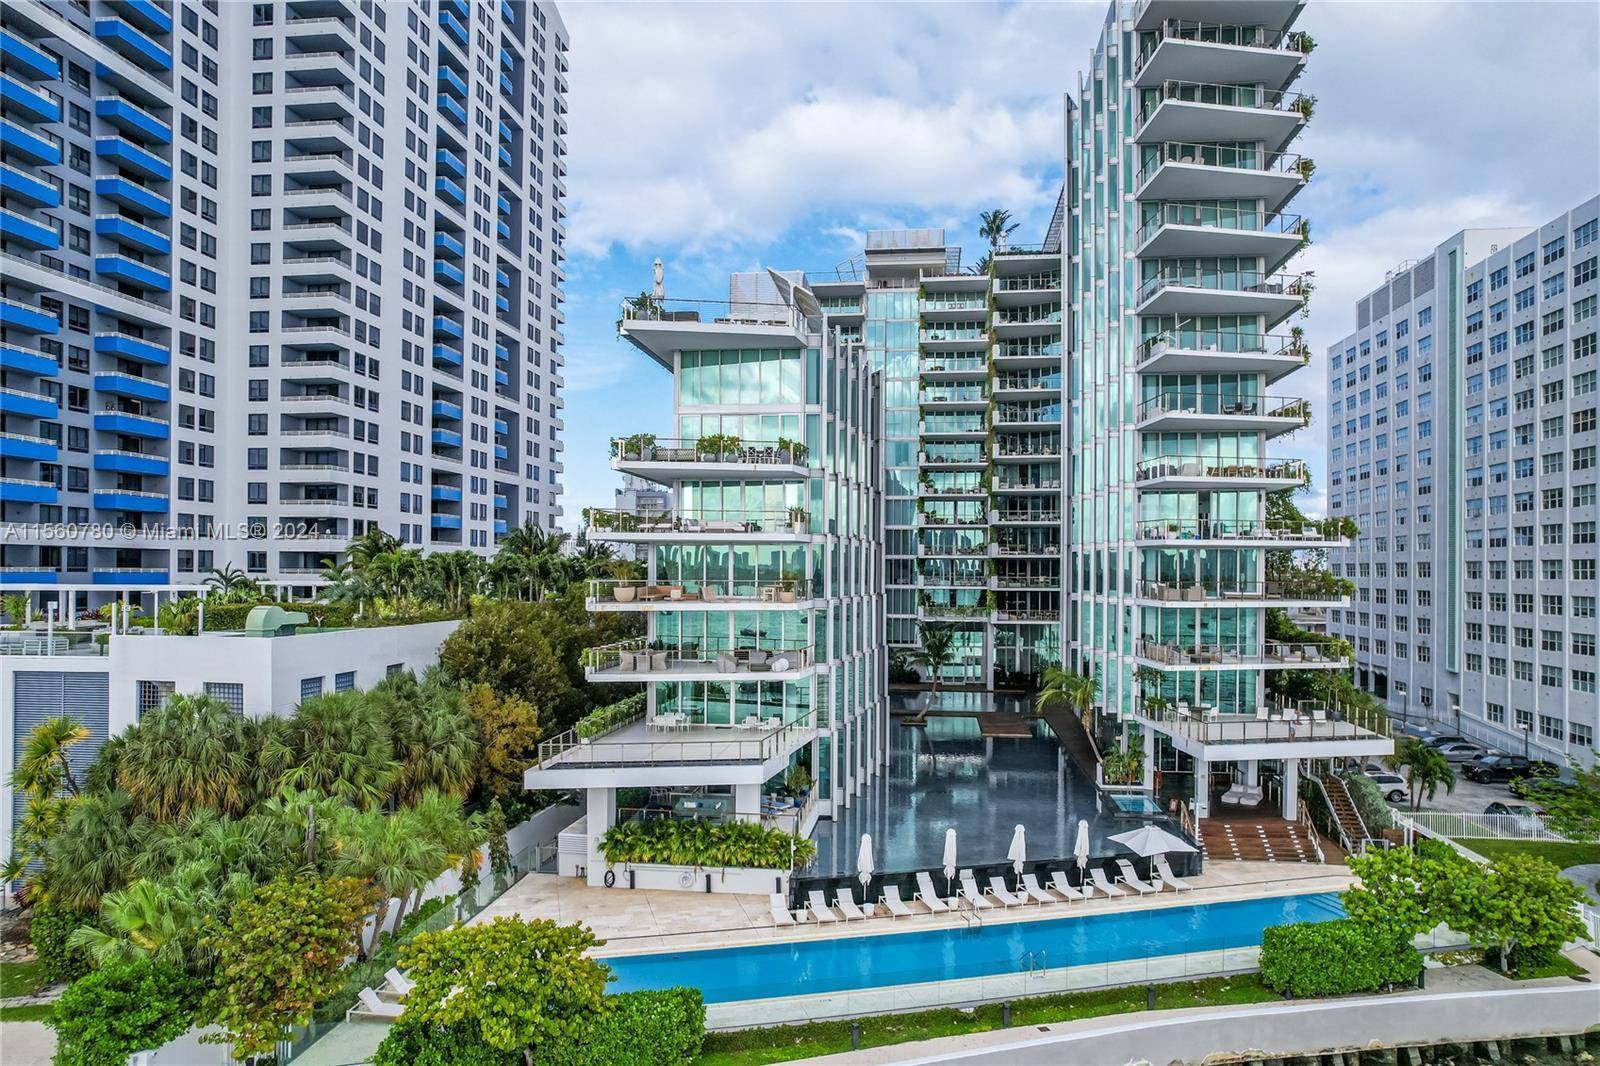 Experience unparalleled sunset views overlooking Biscayne Bay, in the prestigious Monad Terrace, designed by Jean Nouvel, worldwide renowned Architect, Pritzker winner.